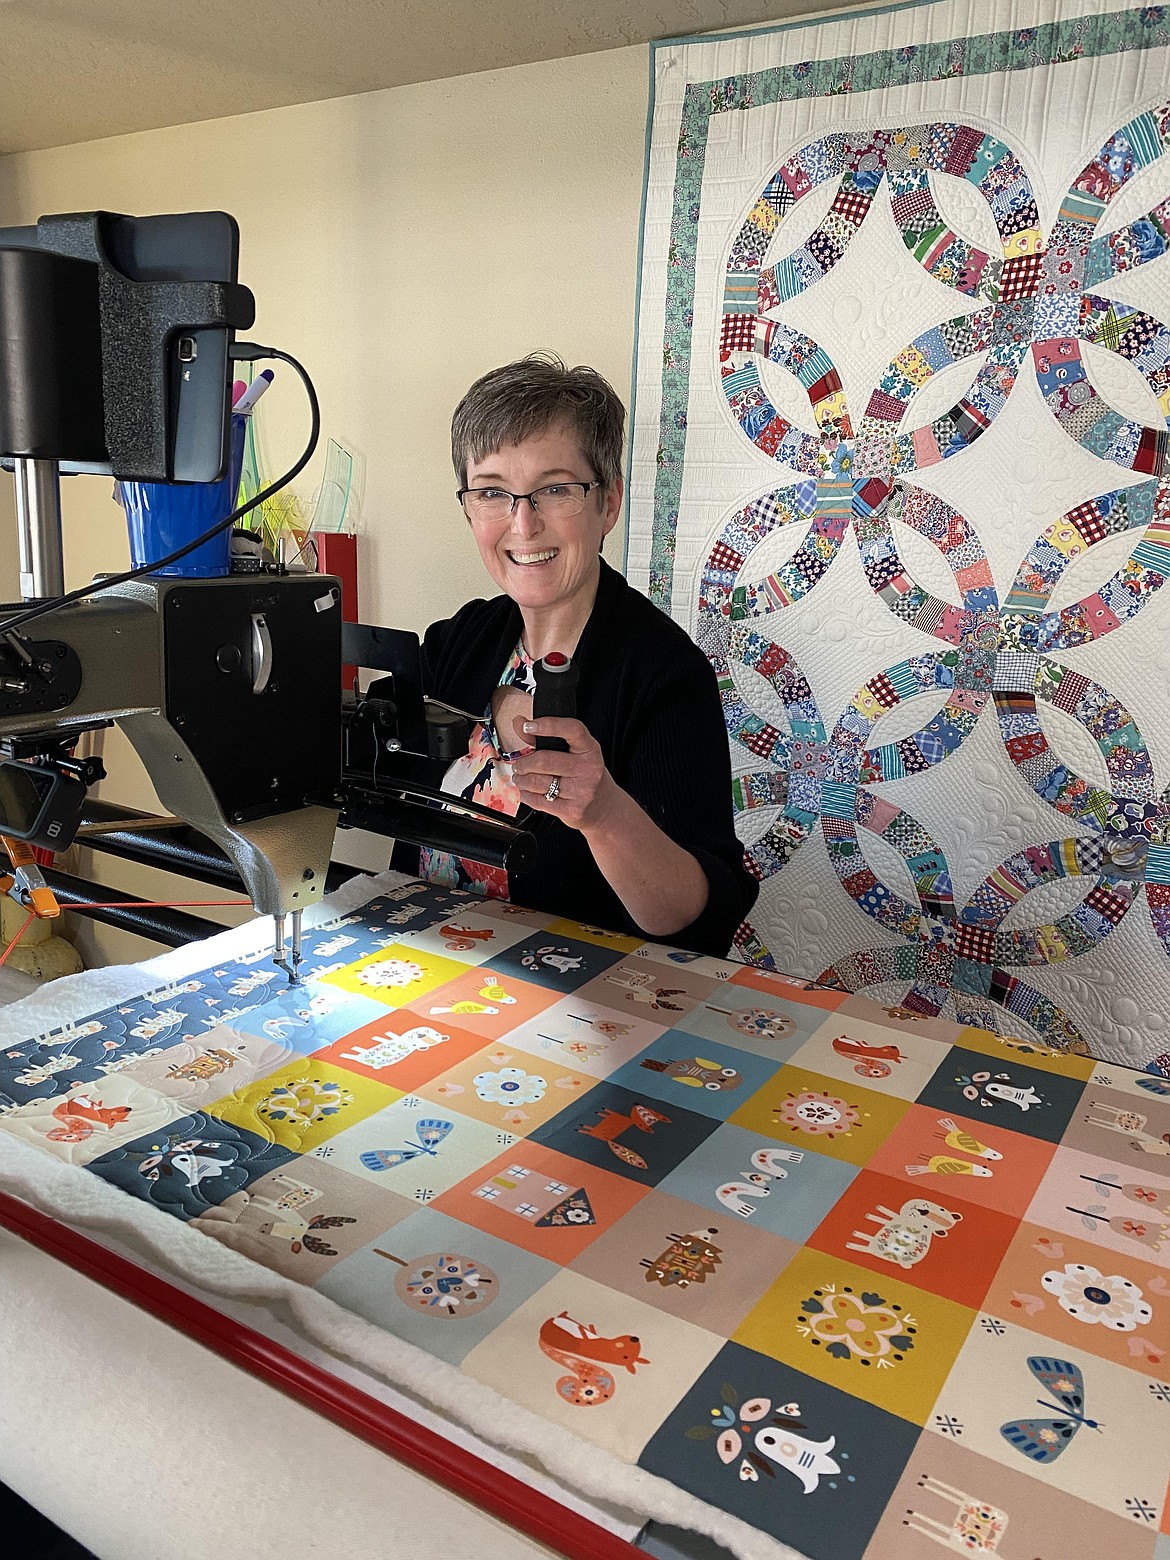 Pris Phillips pays to have her baby quilts long-arm quilted by Susan Smith (pictured) before they are donated to the Kootenai Health Neonatal Intensive Care Unit. Wee Ones Quilts was established by Phillips to give baby blankets to patients in the NICU.